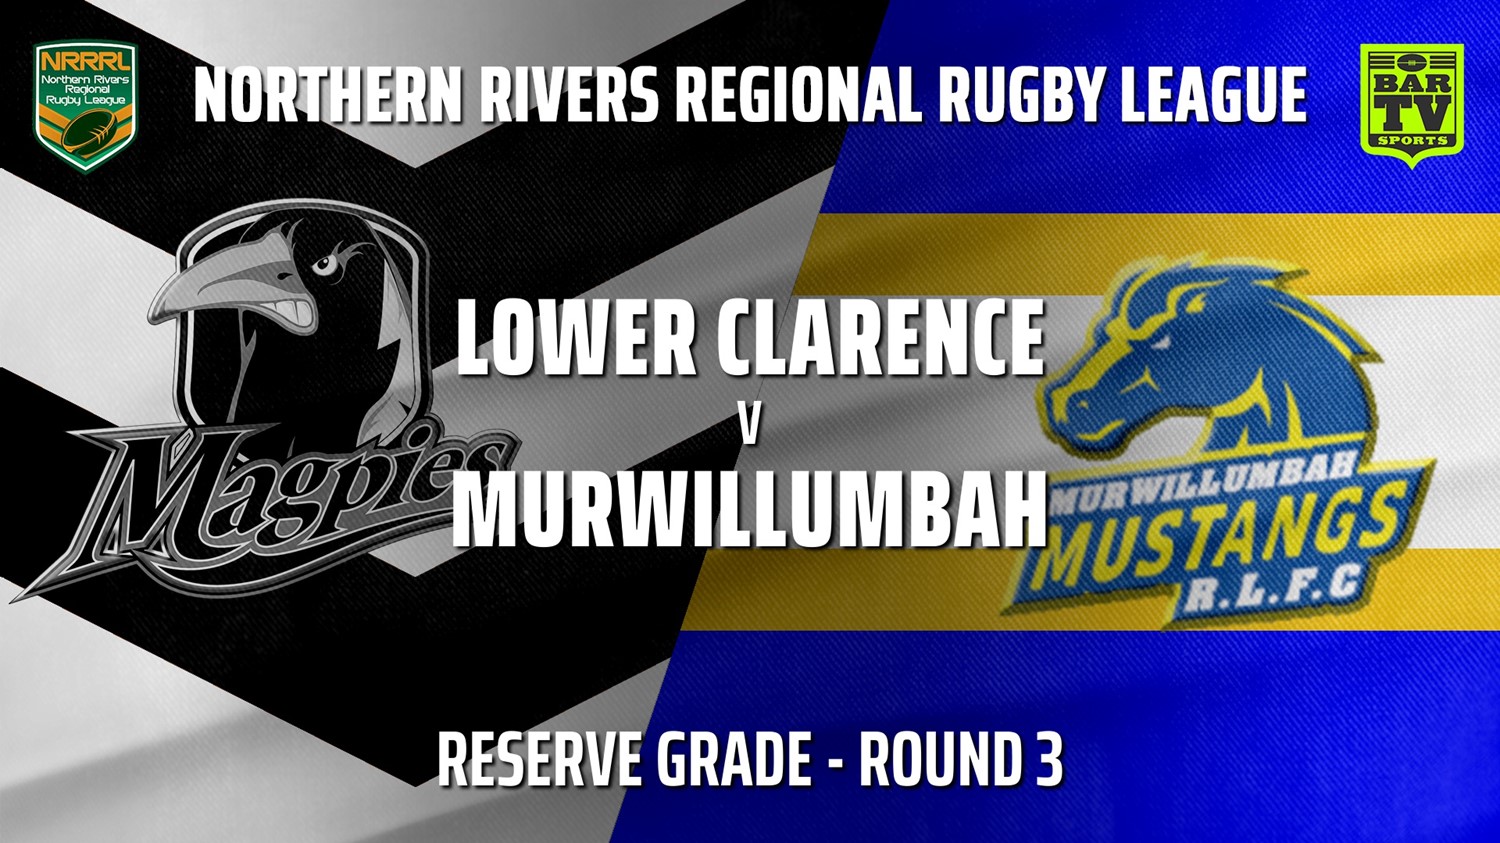 210516-NRRRL Round 3 - Reserve Grade - Lower Clarence Magpies v Murwillumbah Mustangs Slate Image